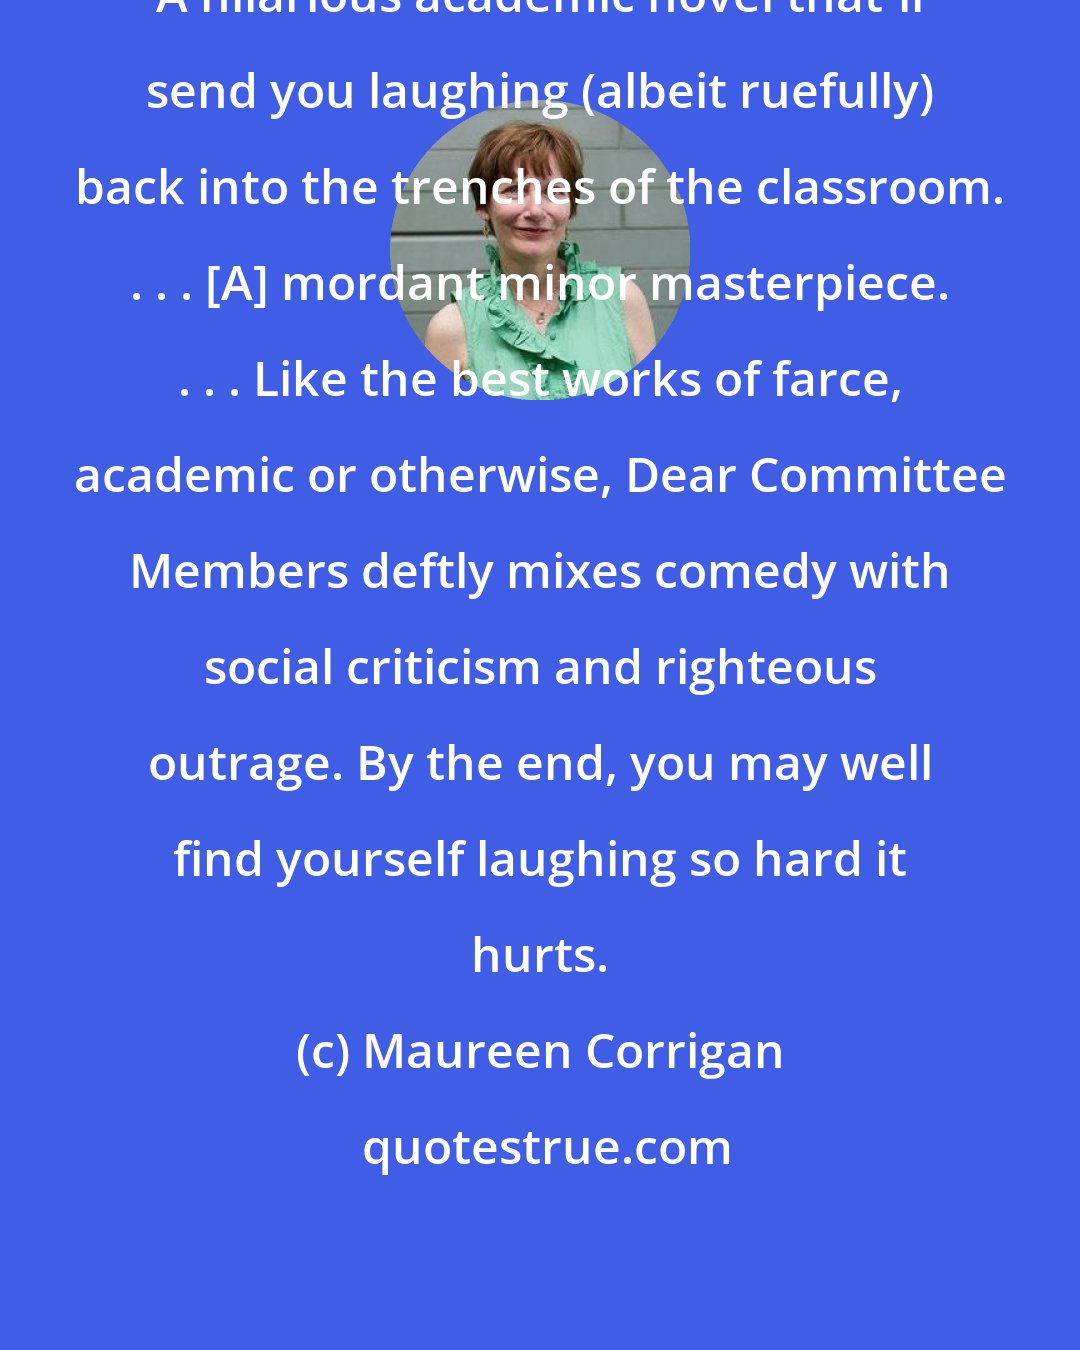 Maureen Corrigan: A hilarious academic novel that'll send you laughing (albeit ruefully) back into the trenches of the classroom. . . . [A] mordant minor masterpiece. . . . Like the best works of farce, academic or otherwise, Dear Committee Members deftly mixes comedy with social criticism and righteous outrage. By the end, you may well find yourself laughing so hard it hurts.